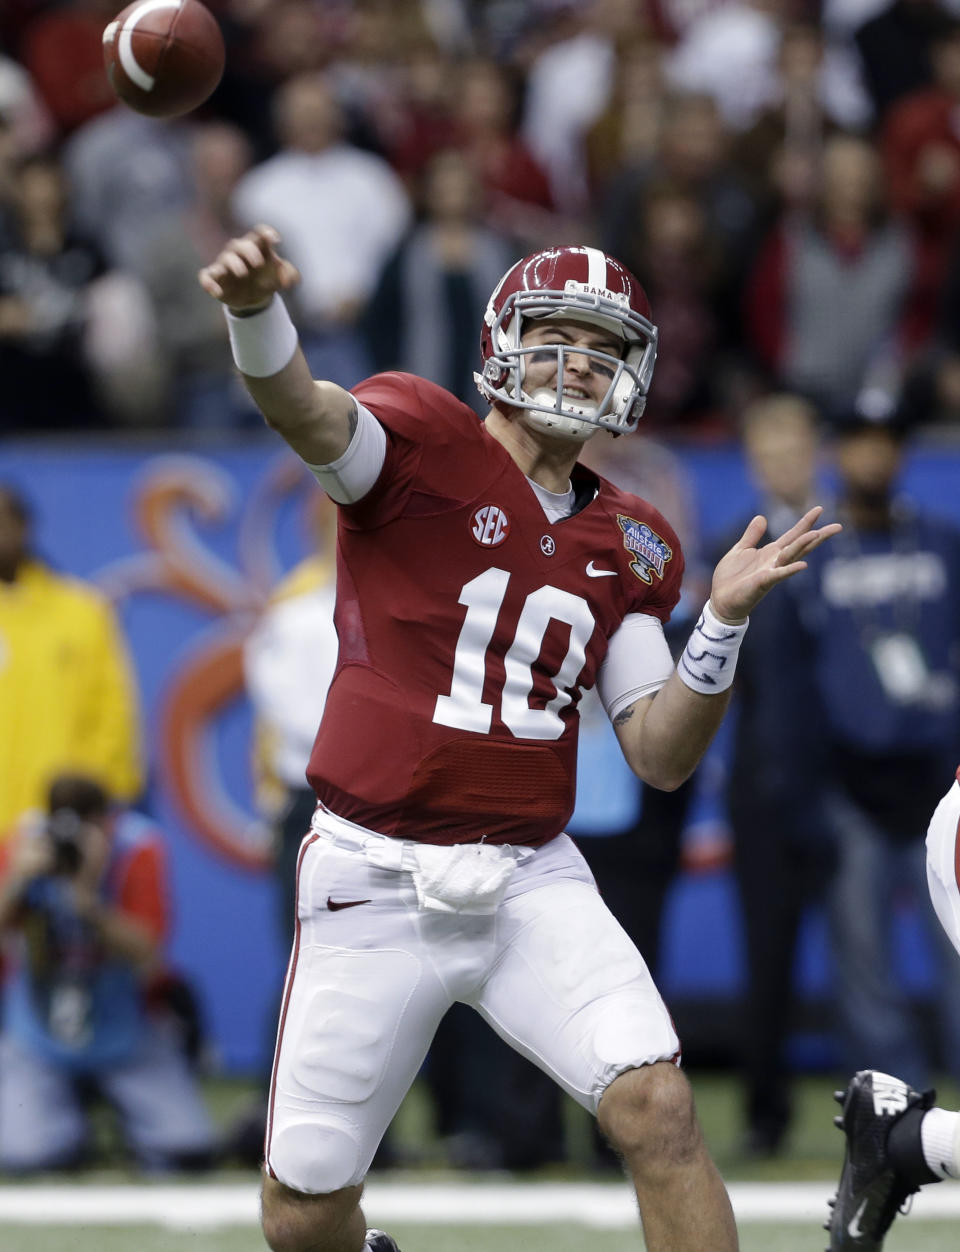 Alabama quarterback AJ McCarron throws during the second half of the NCAA college football Sugar Bowl against Oklahoma in New Orleans, Thursday, Jan. 2, 2014. (AP Photo/Rusty Costanza)